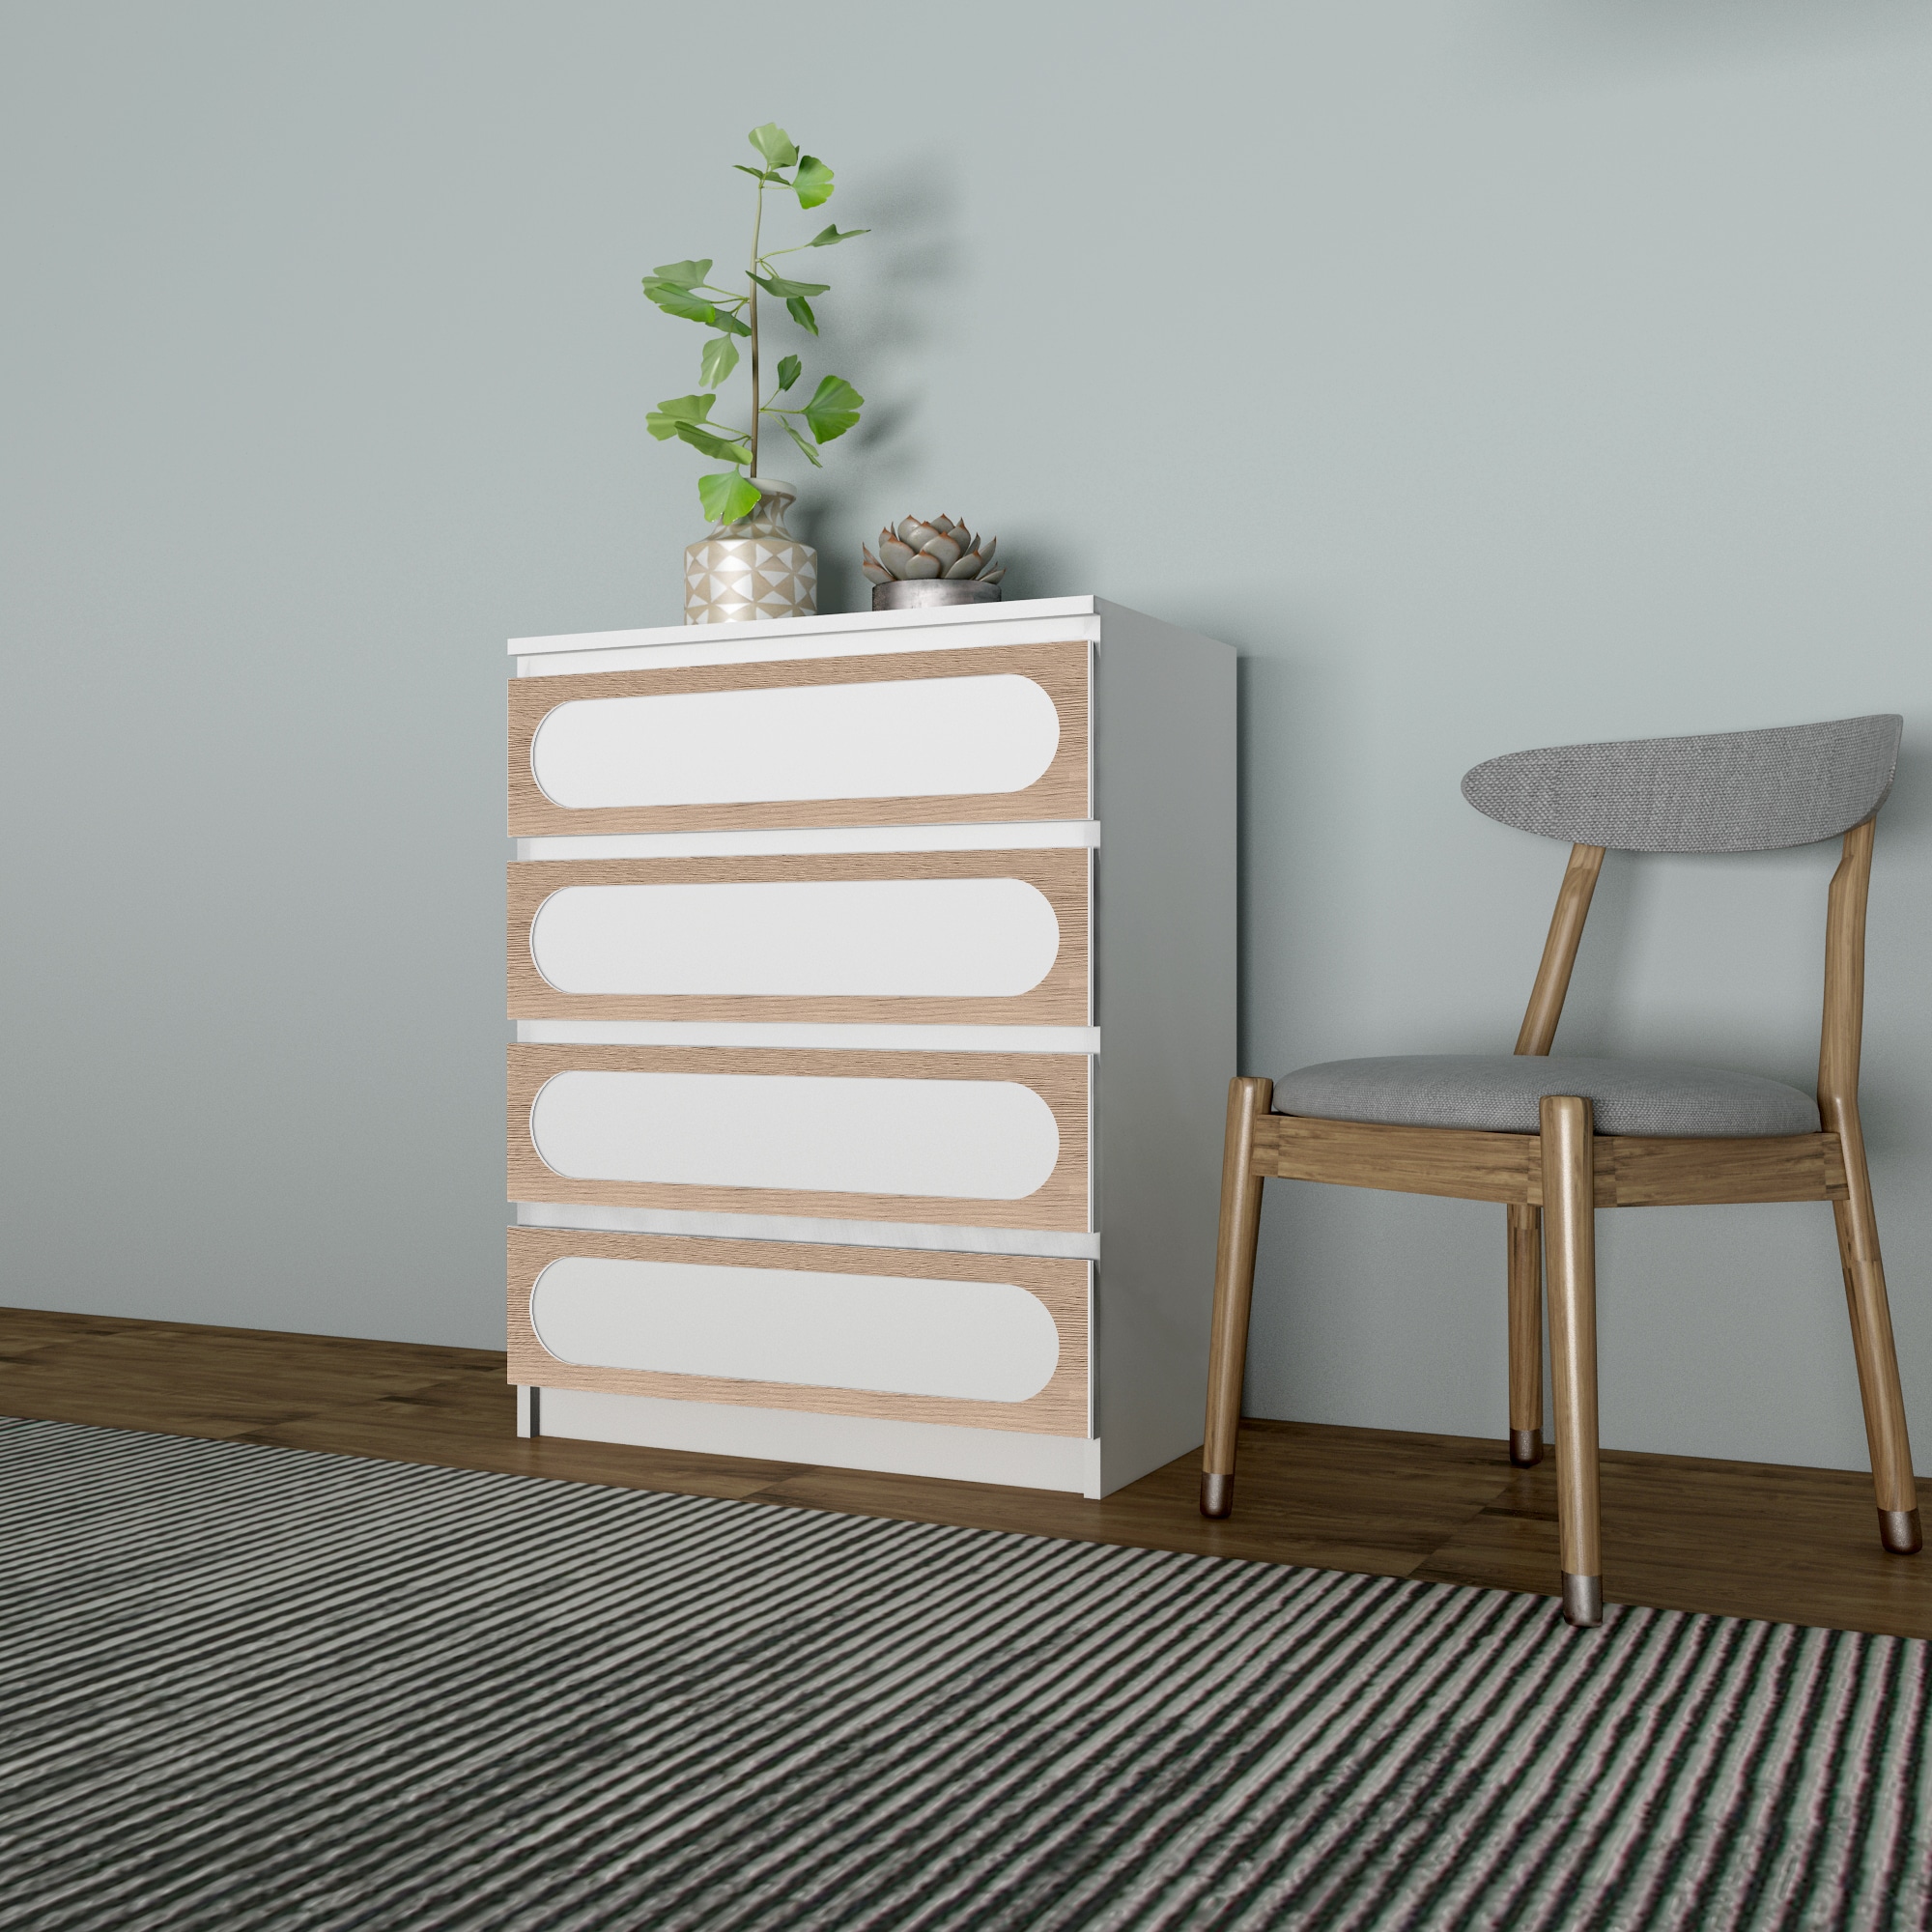 Wooden dresser overlays with rattan pattern for IKEA® malm furniture